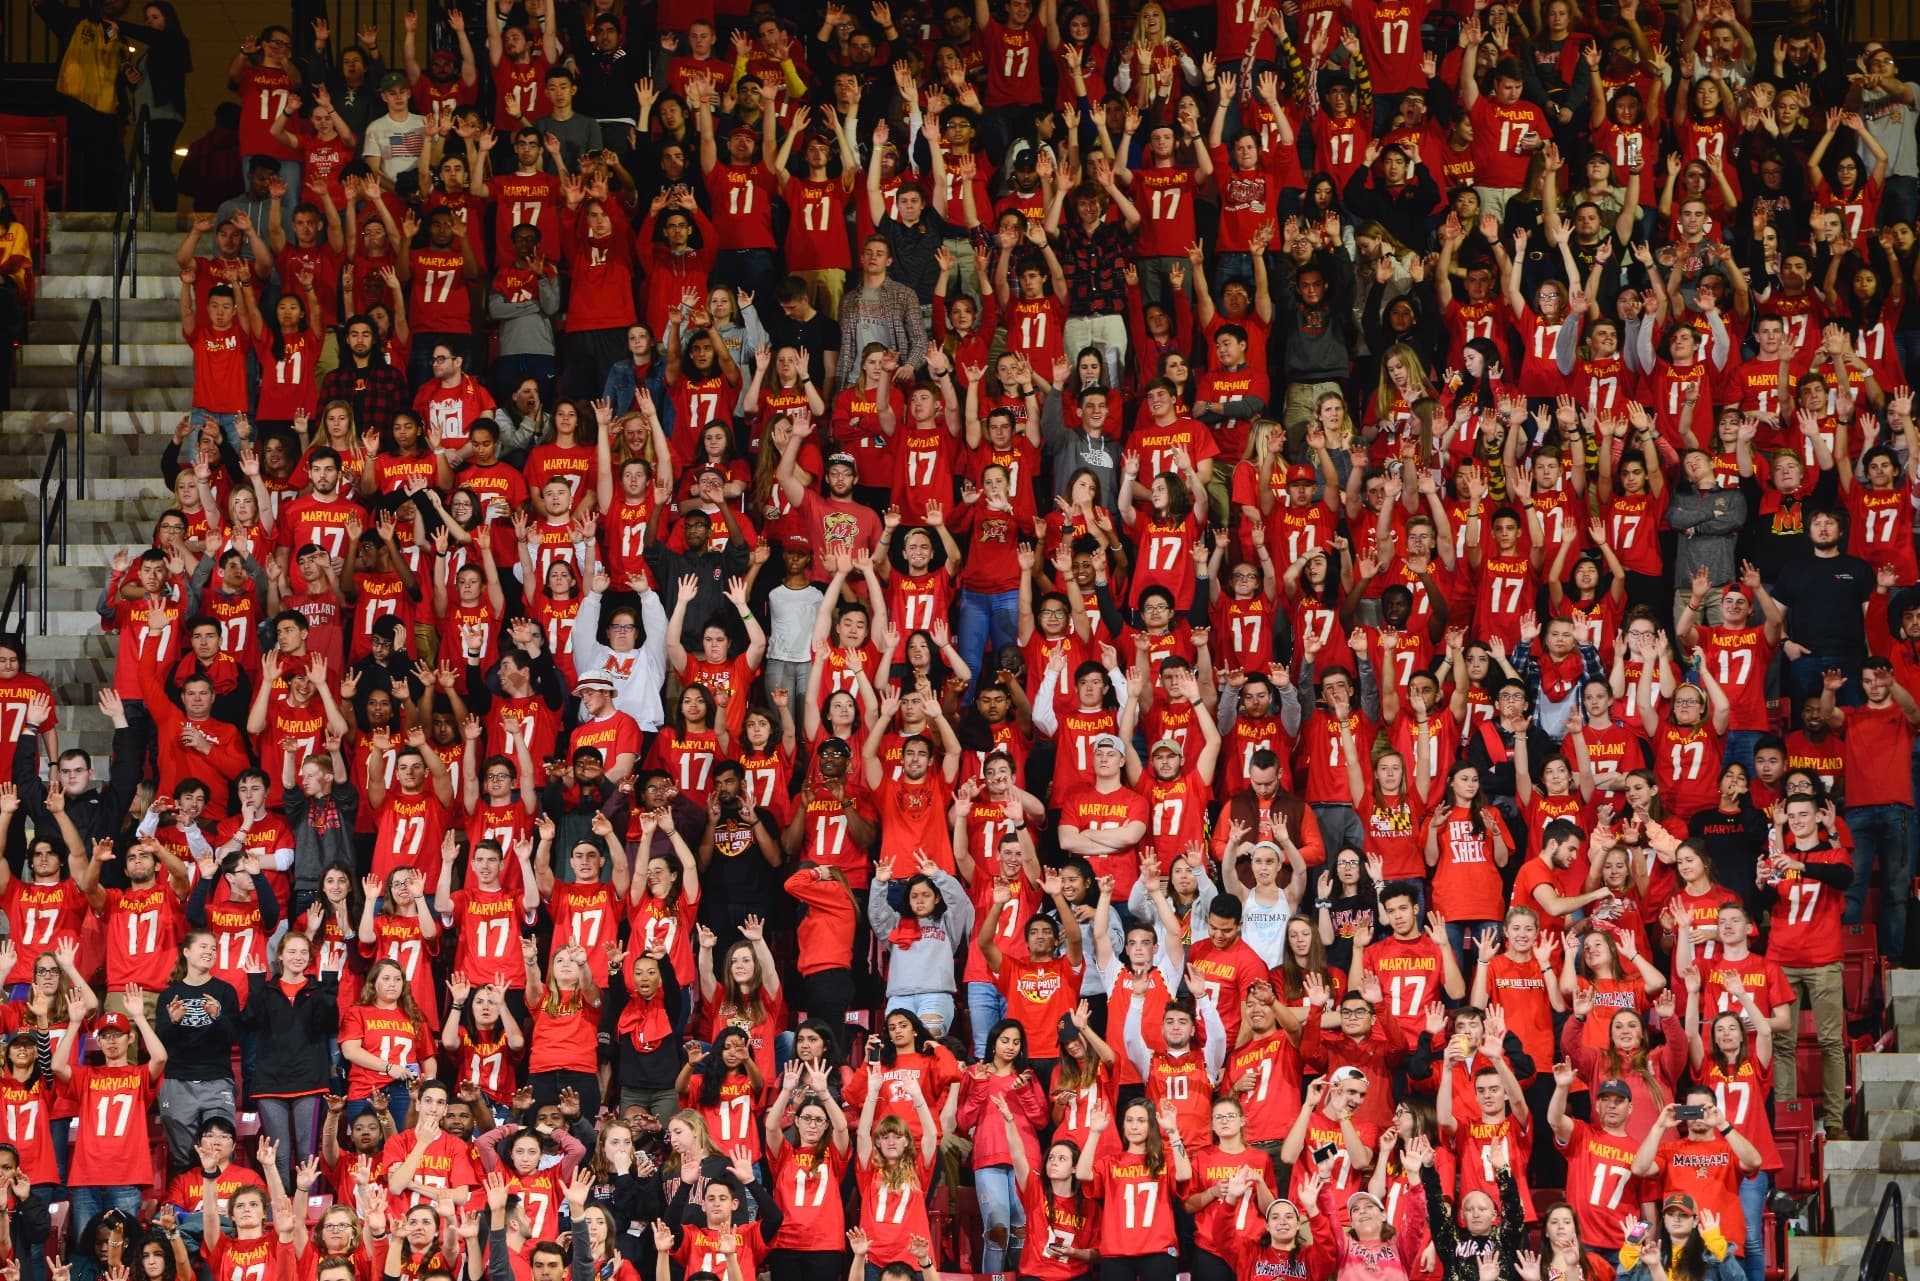 Wide shot of fans at a University of Maryland Basketball game standing and cheering, everyone is wearing some for of Maryland Red attire